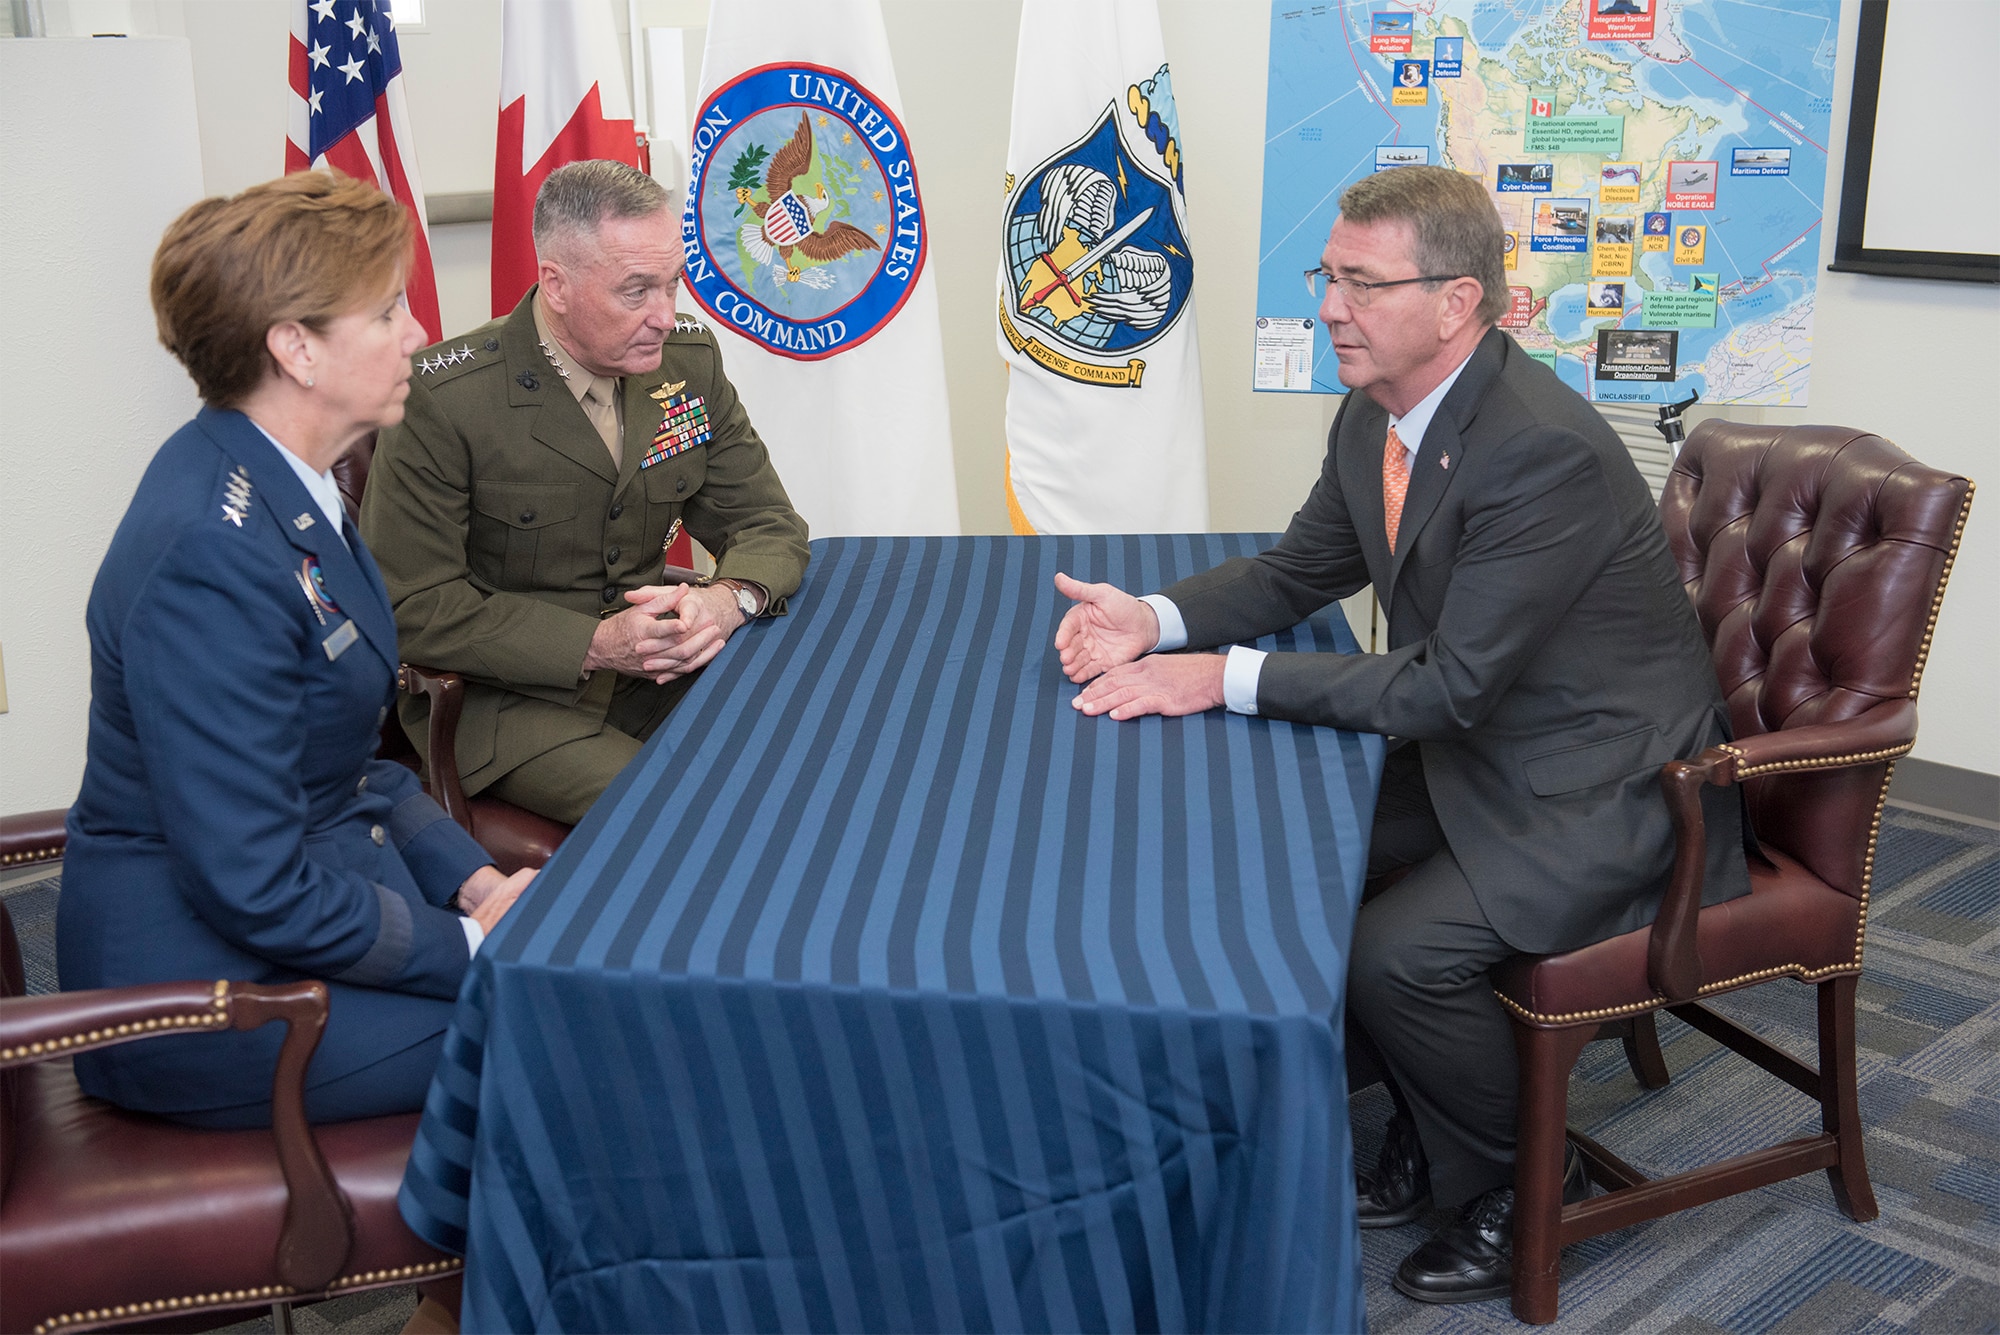 Marine Corps Gen. Joe Dunford, chairman of the Joint Chiefs of Staff, and Air Force Gen. Lori J. Robinson, commander of U.S. Northern Command and North American Aerospace Defense Command, speak with Defense Secretary Ash Carter at Peterson Air Force Base, Colo., May 13, 2016. Robinson provided remarks at the United State of Women Summit in Washington, D.C., June 14, 2016. DoD photo by Navy Petty Officer 2nd Class Dominique A. Pineiro